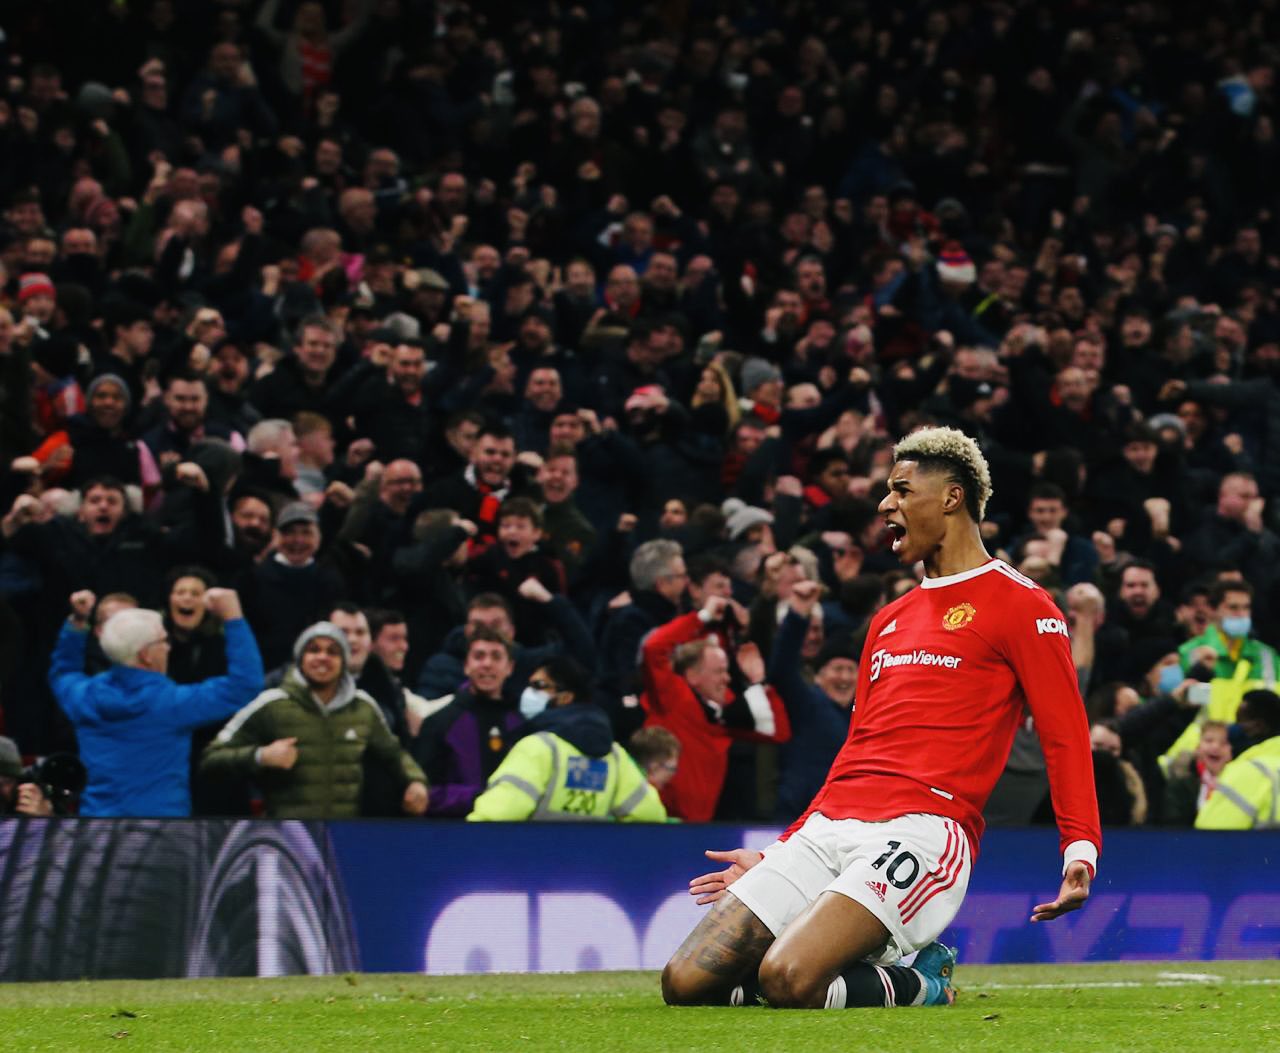 Transfer News: Manchester United are eager to keep Marcus Rashford amid PSG interest.